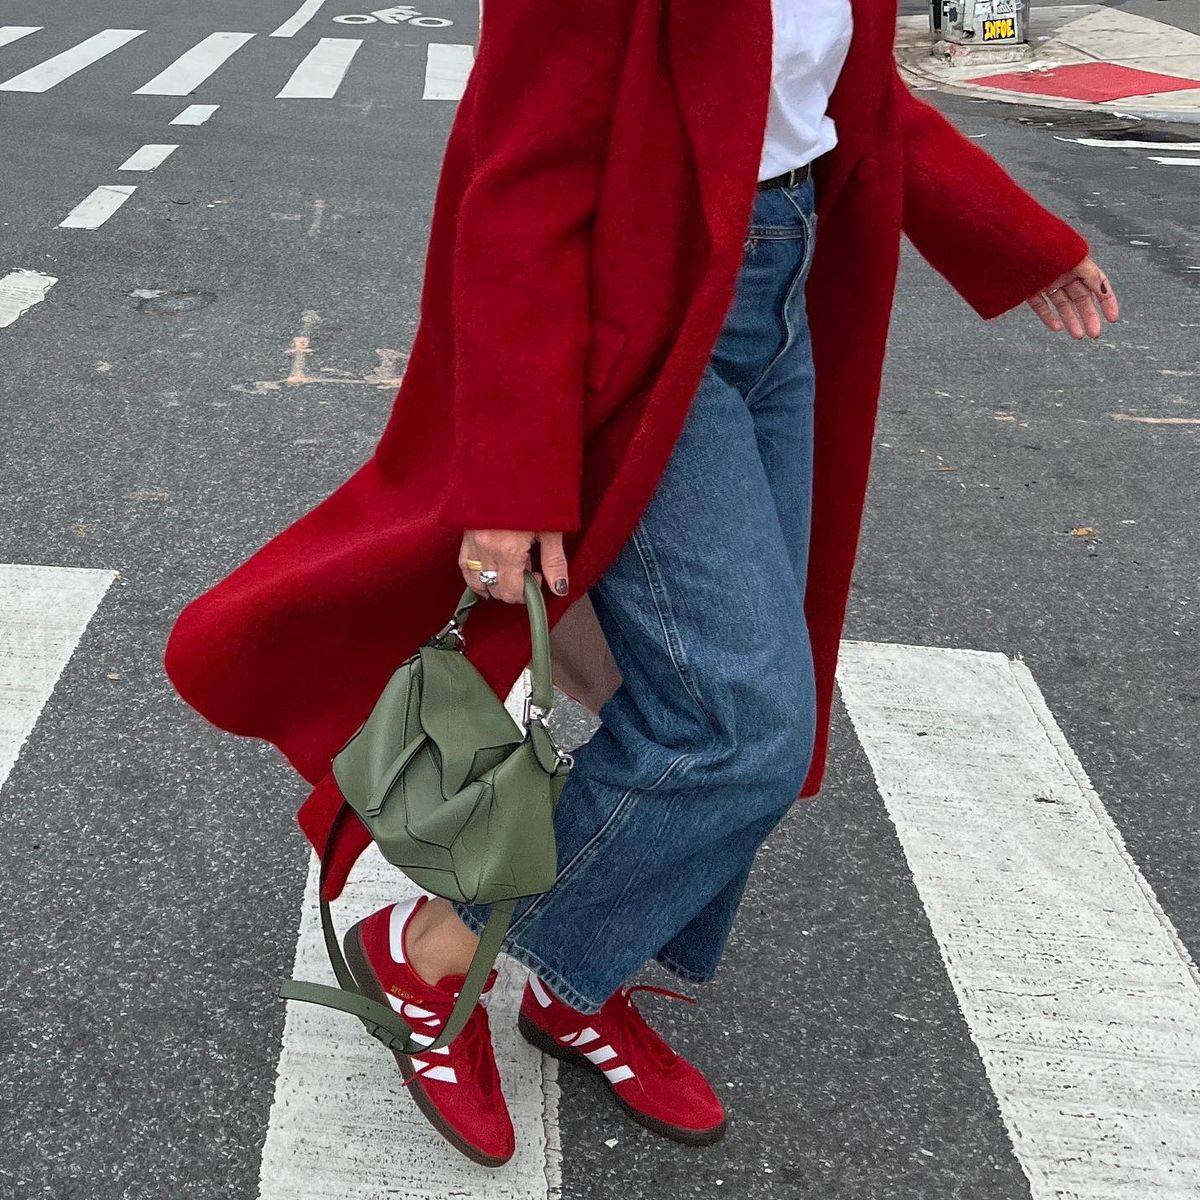 The Red Trainer Trend Keeps Cropping Up on Chic Spring Outfits